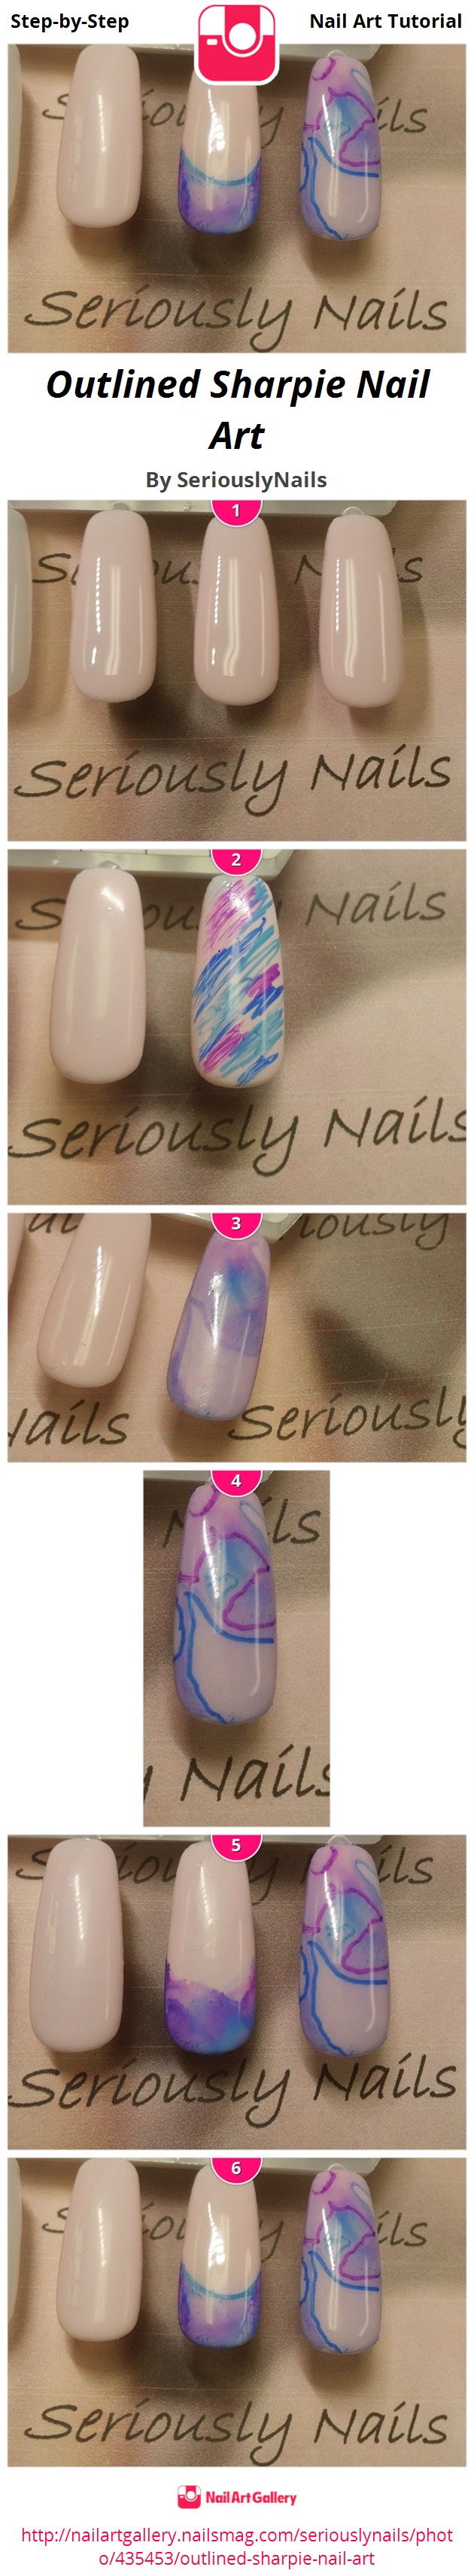 Outlined Sharpie Nail Art - Nail Art Gallery